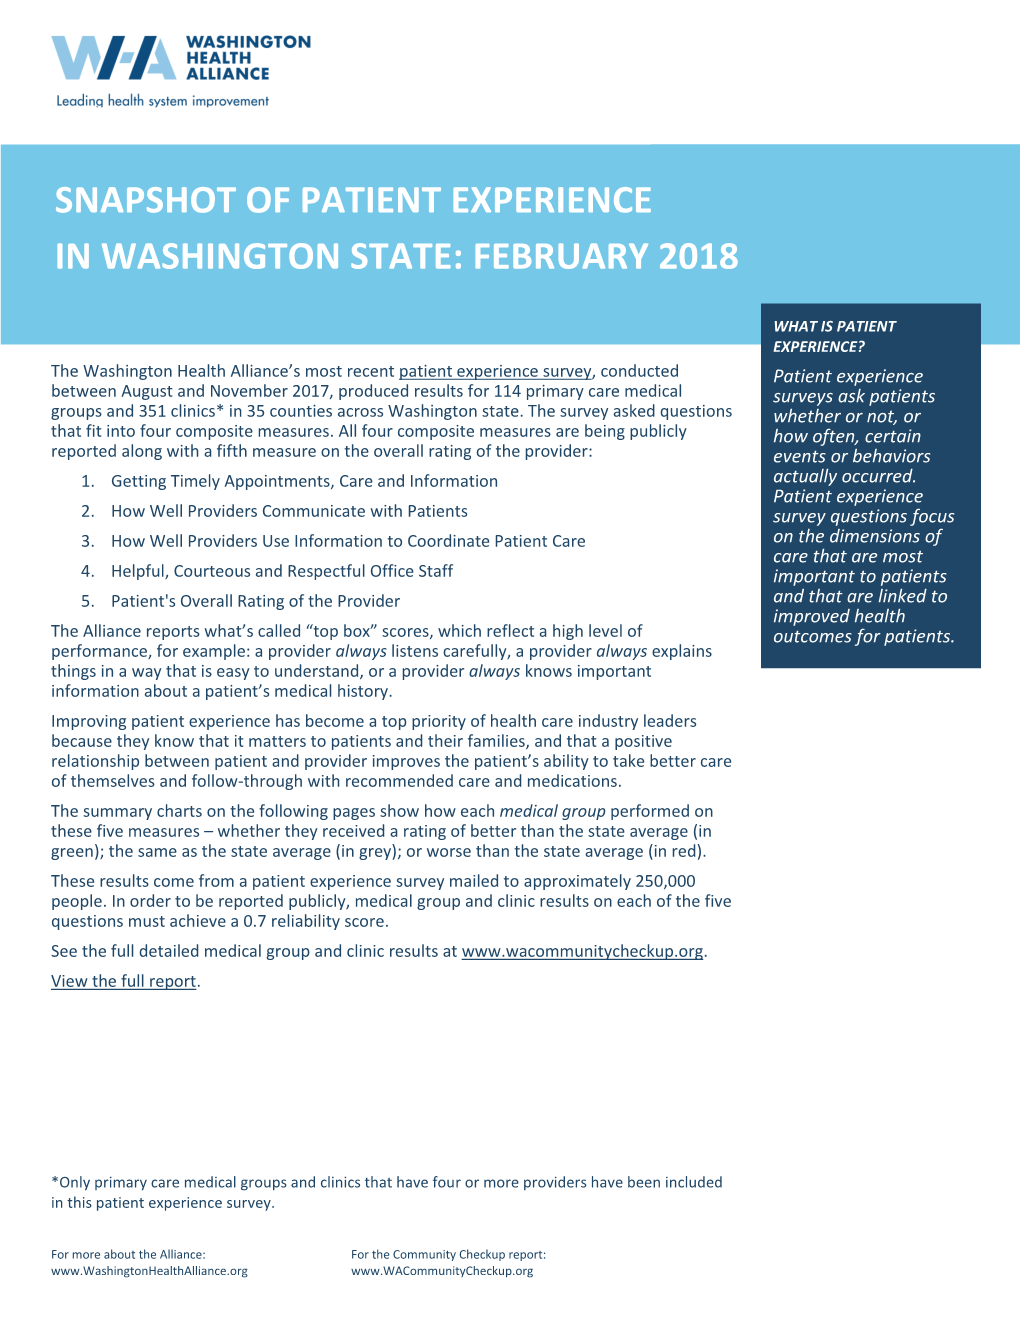 Snapshot of Patient Experience in Washington State: February 2018